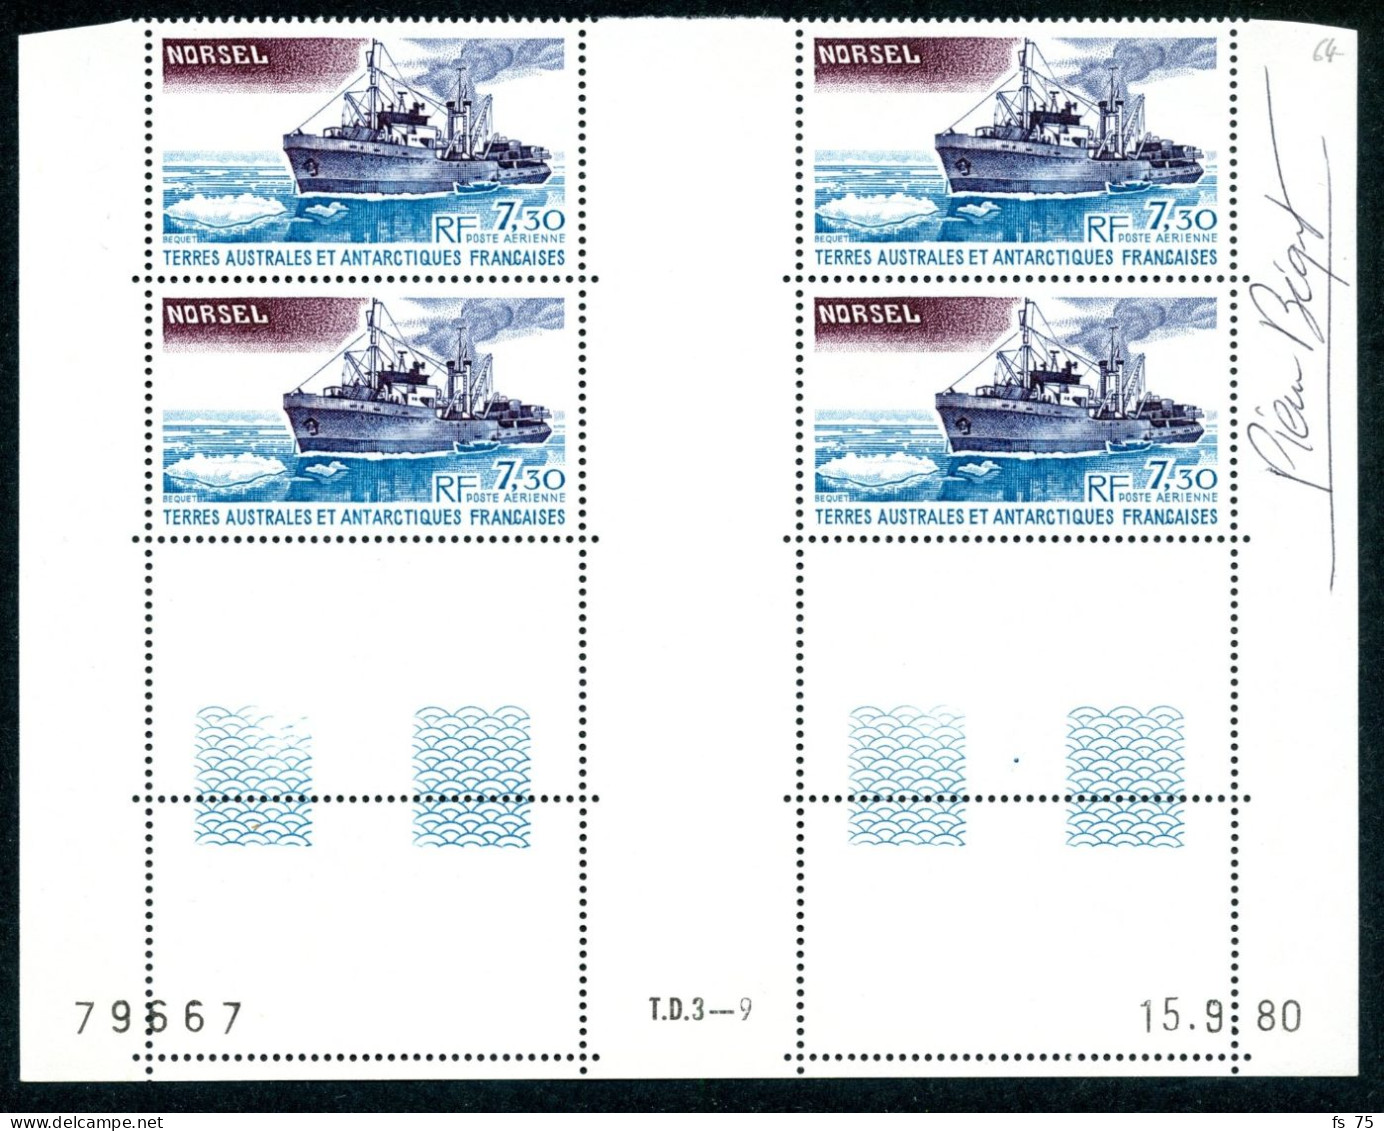 TAAF - PA N°64 -  NORSEL - BLOC DE 4 - COIN DATE - SIGNE P. BEQUET - Nuevos